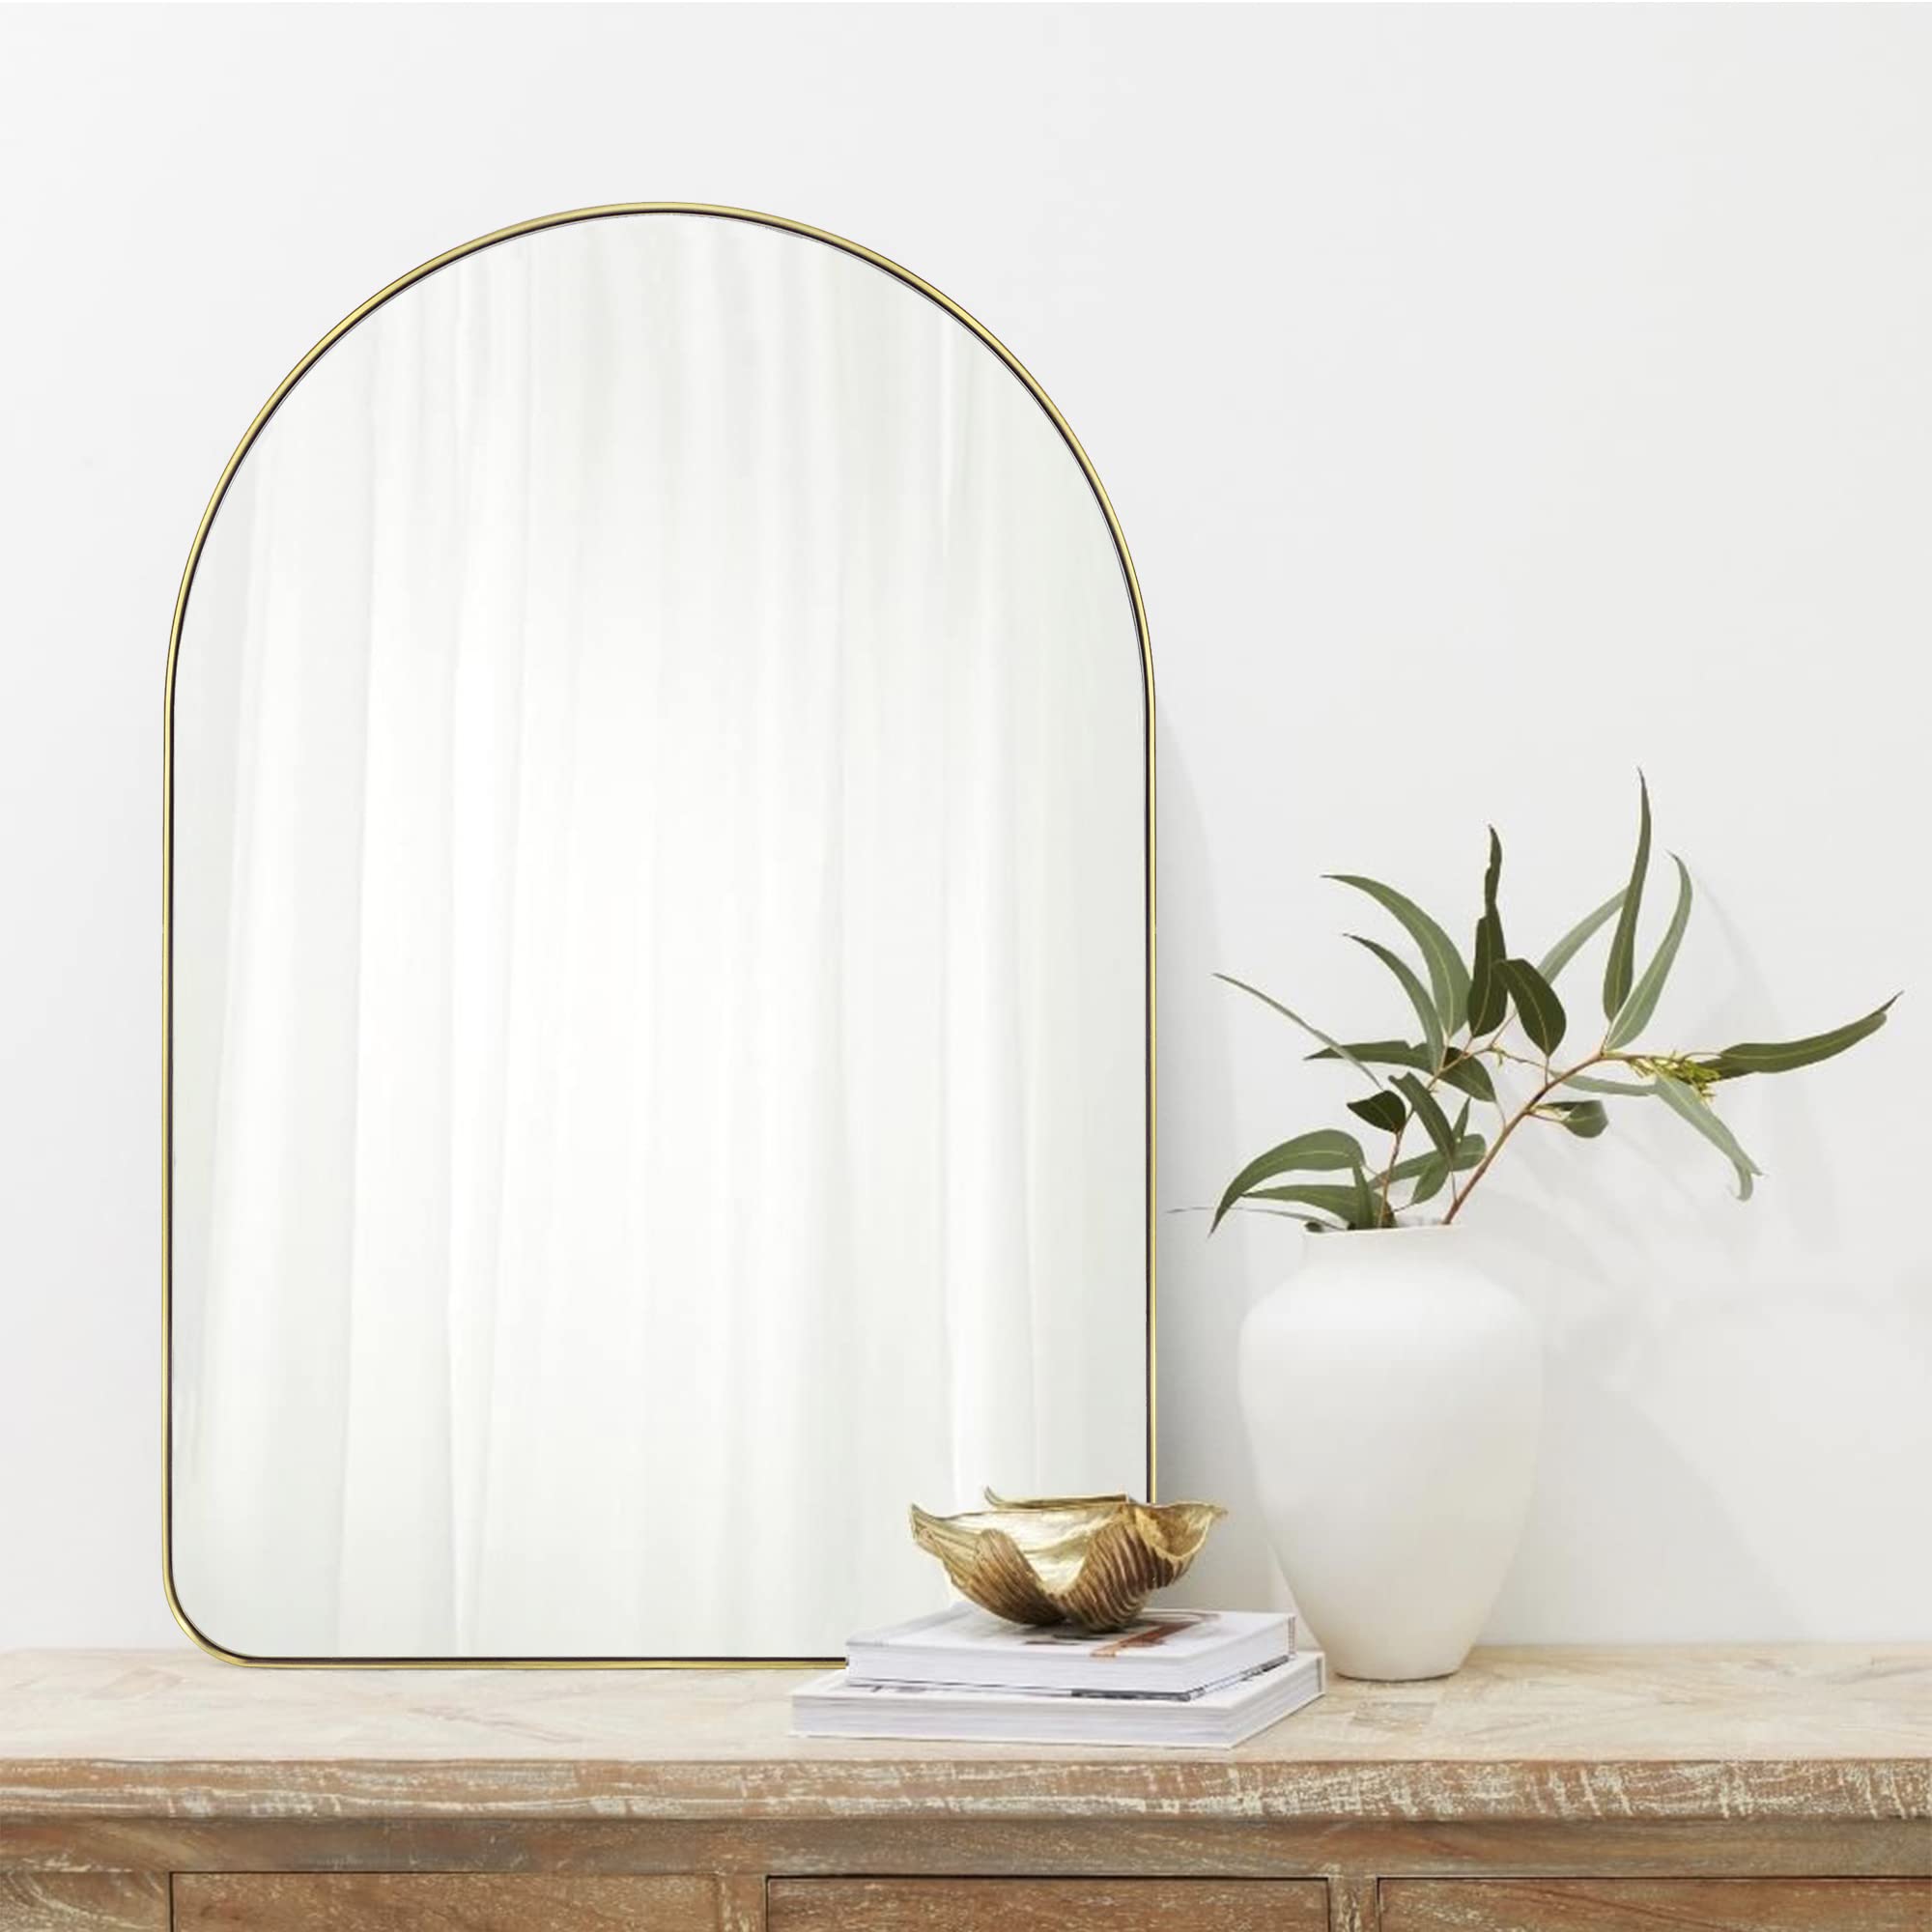 Arch Metal Wall Mirror-24x36-Brushed Gold